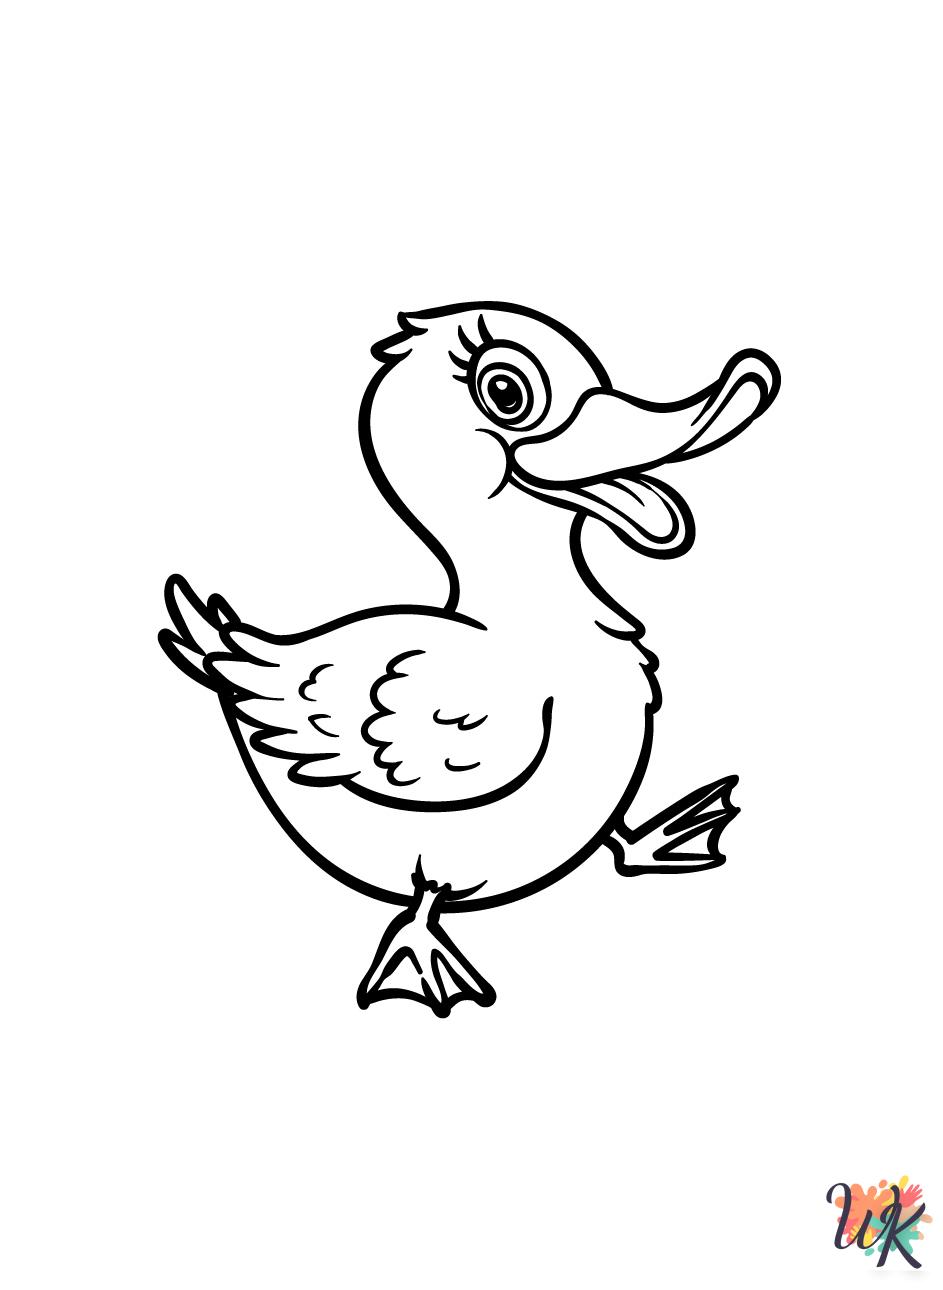 Ducks coloring pages for adults